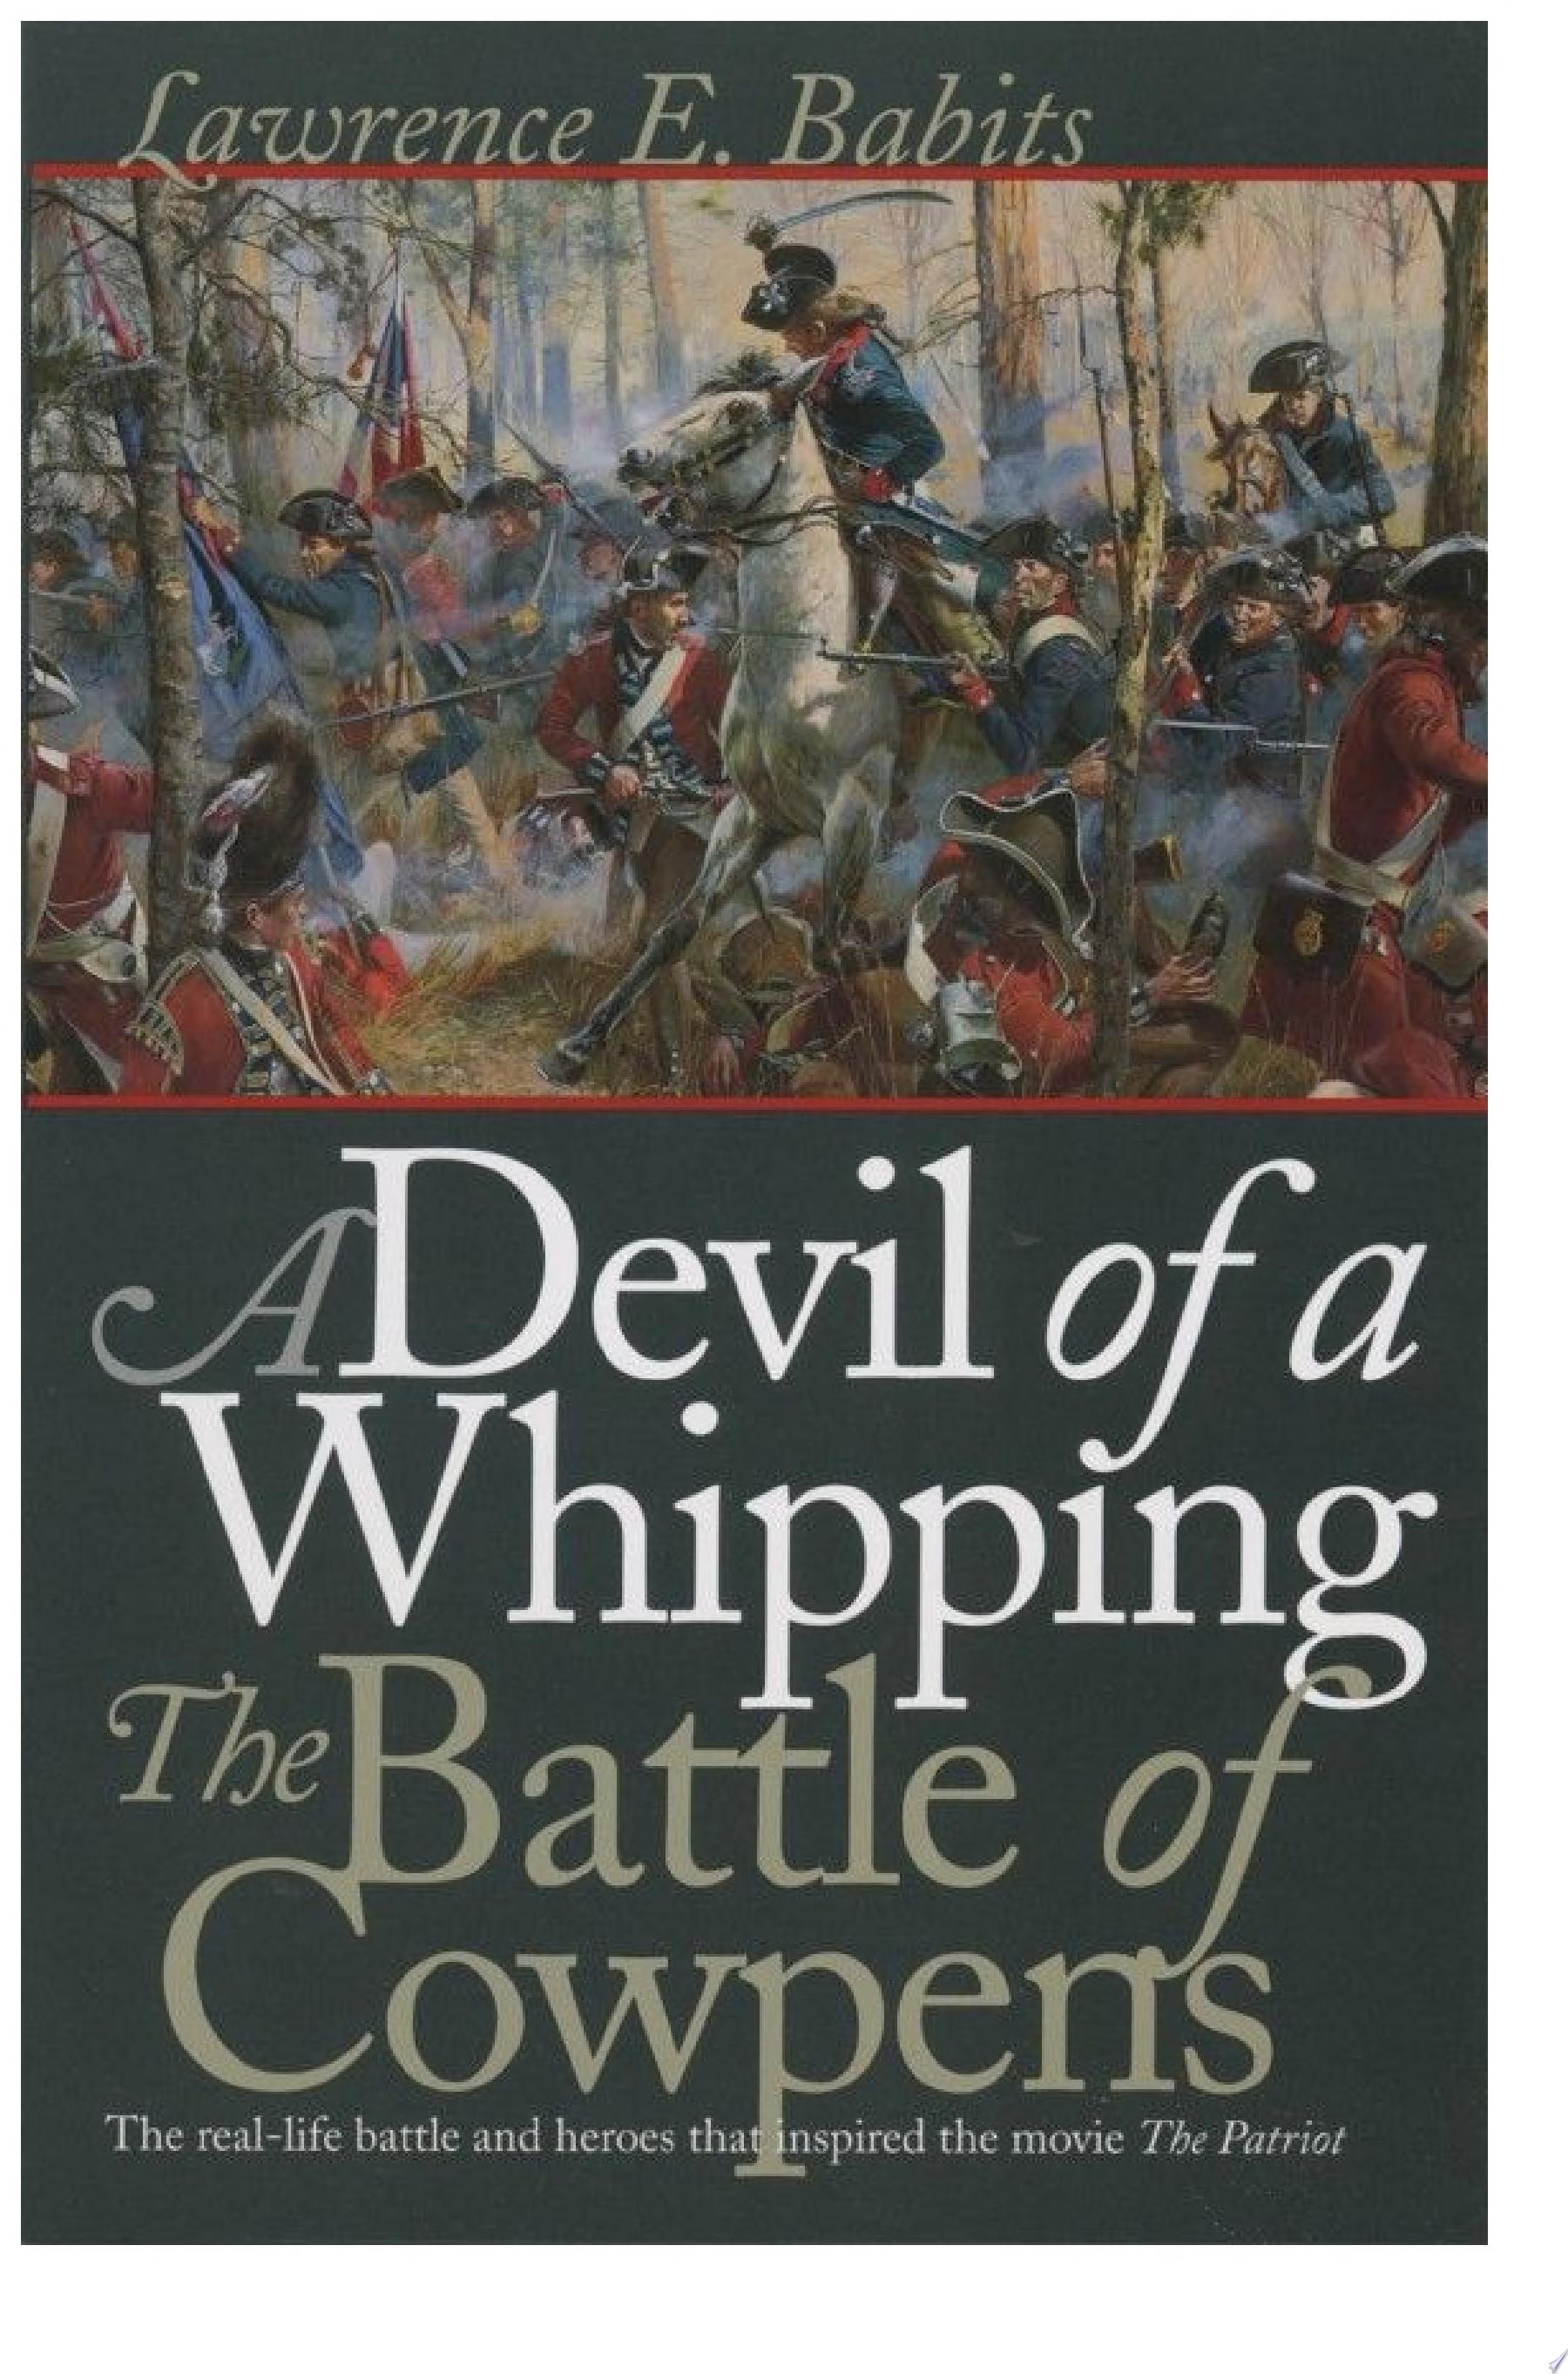 Image for "A Devil of a Whipping"